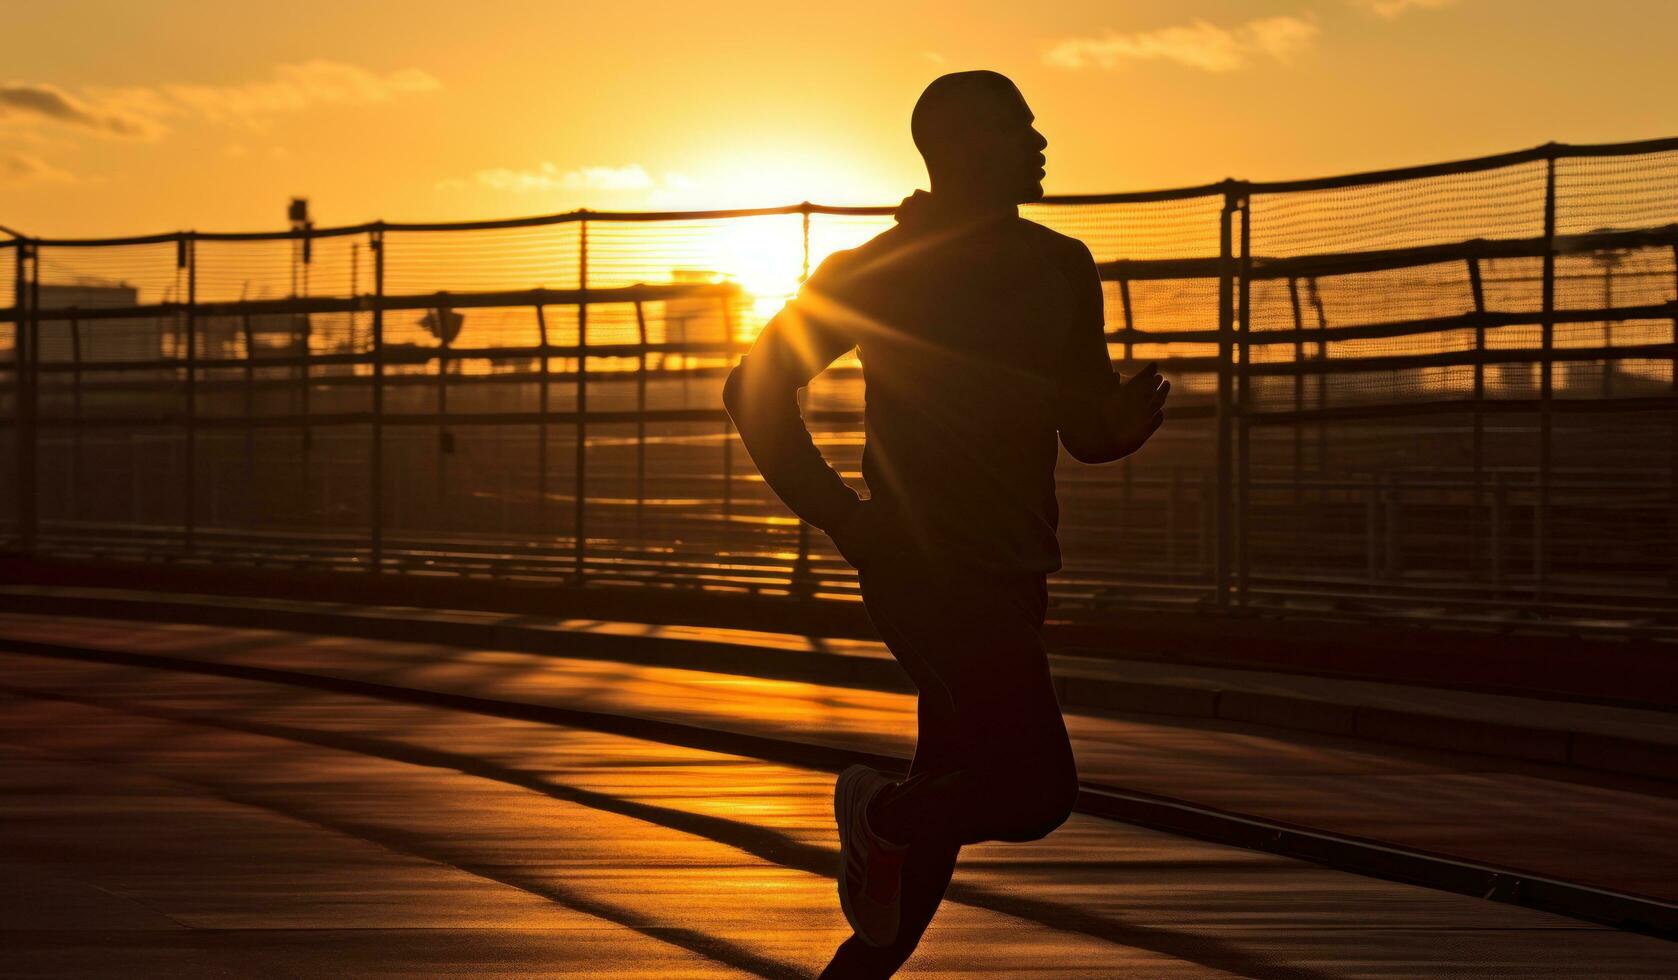 runner at the racing track setting a time against the sun photo